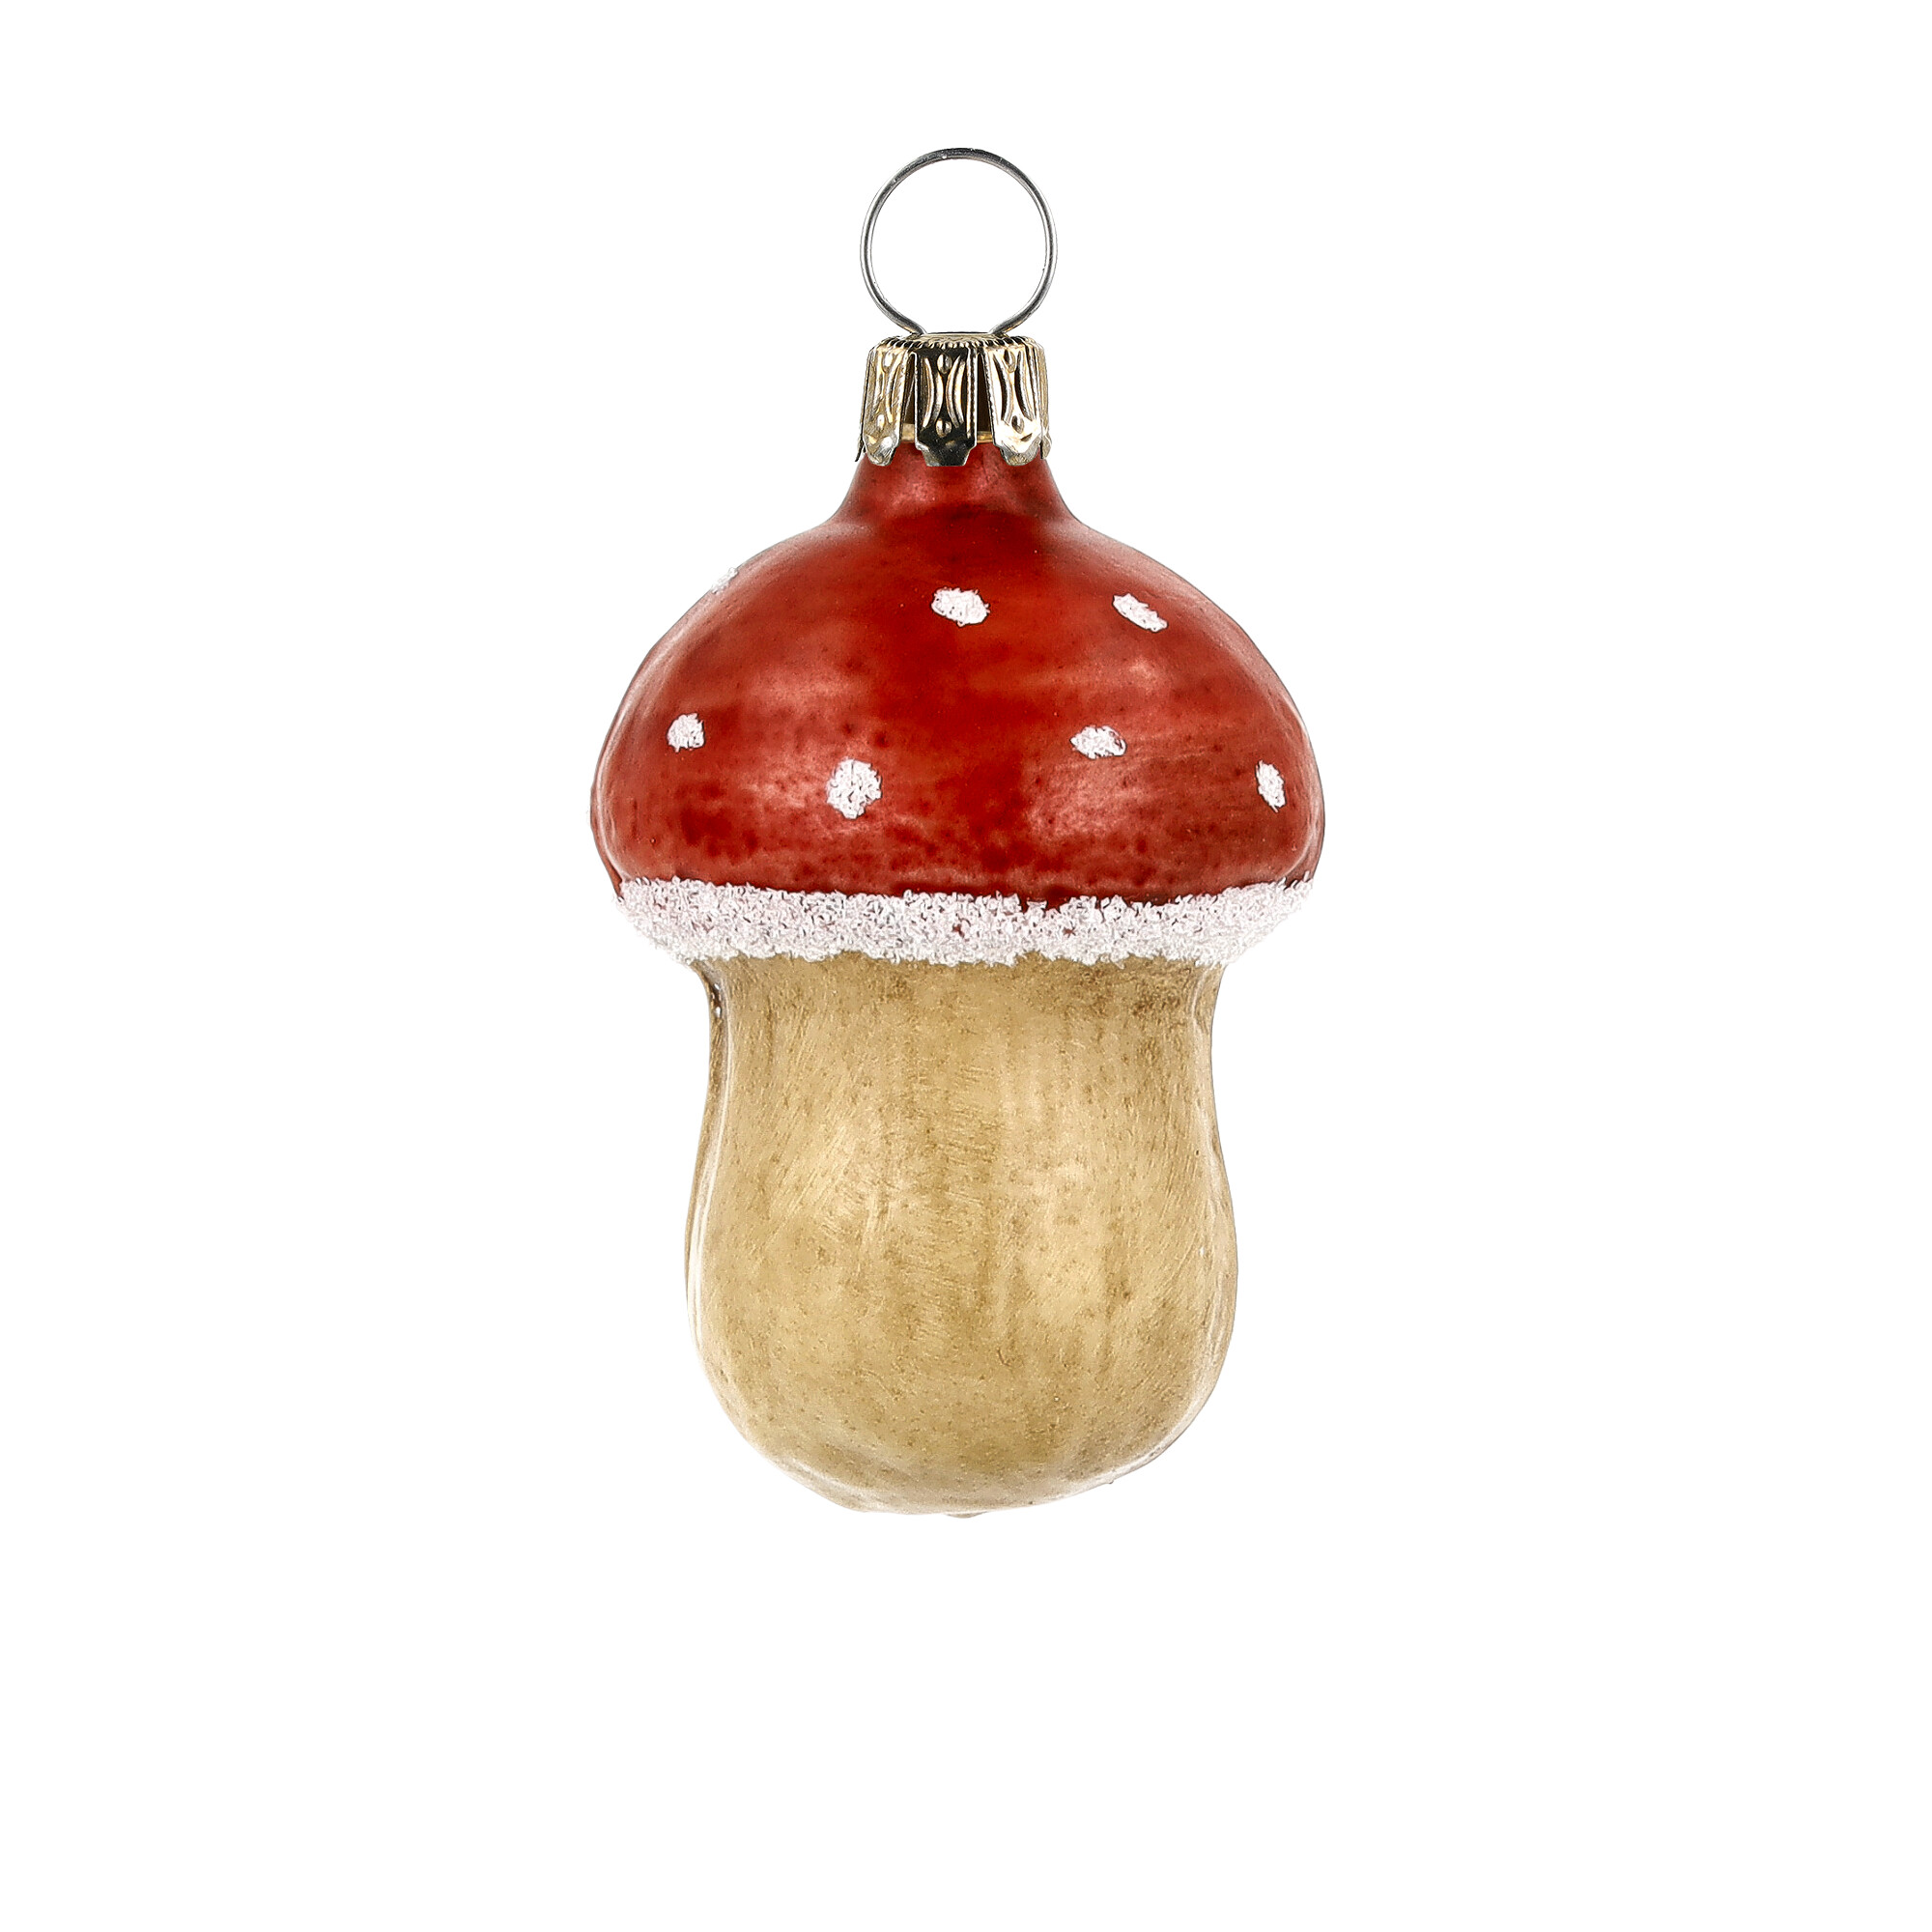 Retro Vintage style Christmas Glass Ornament - Little fly agaric